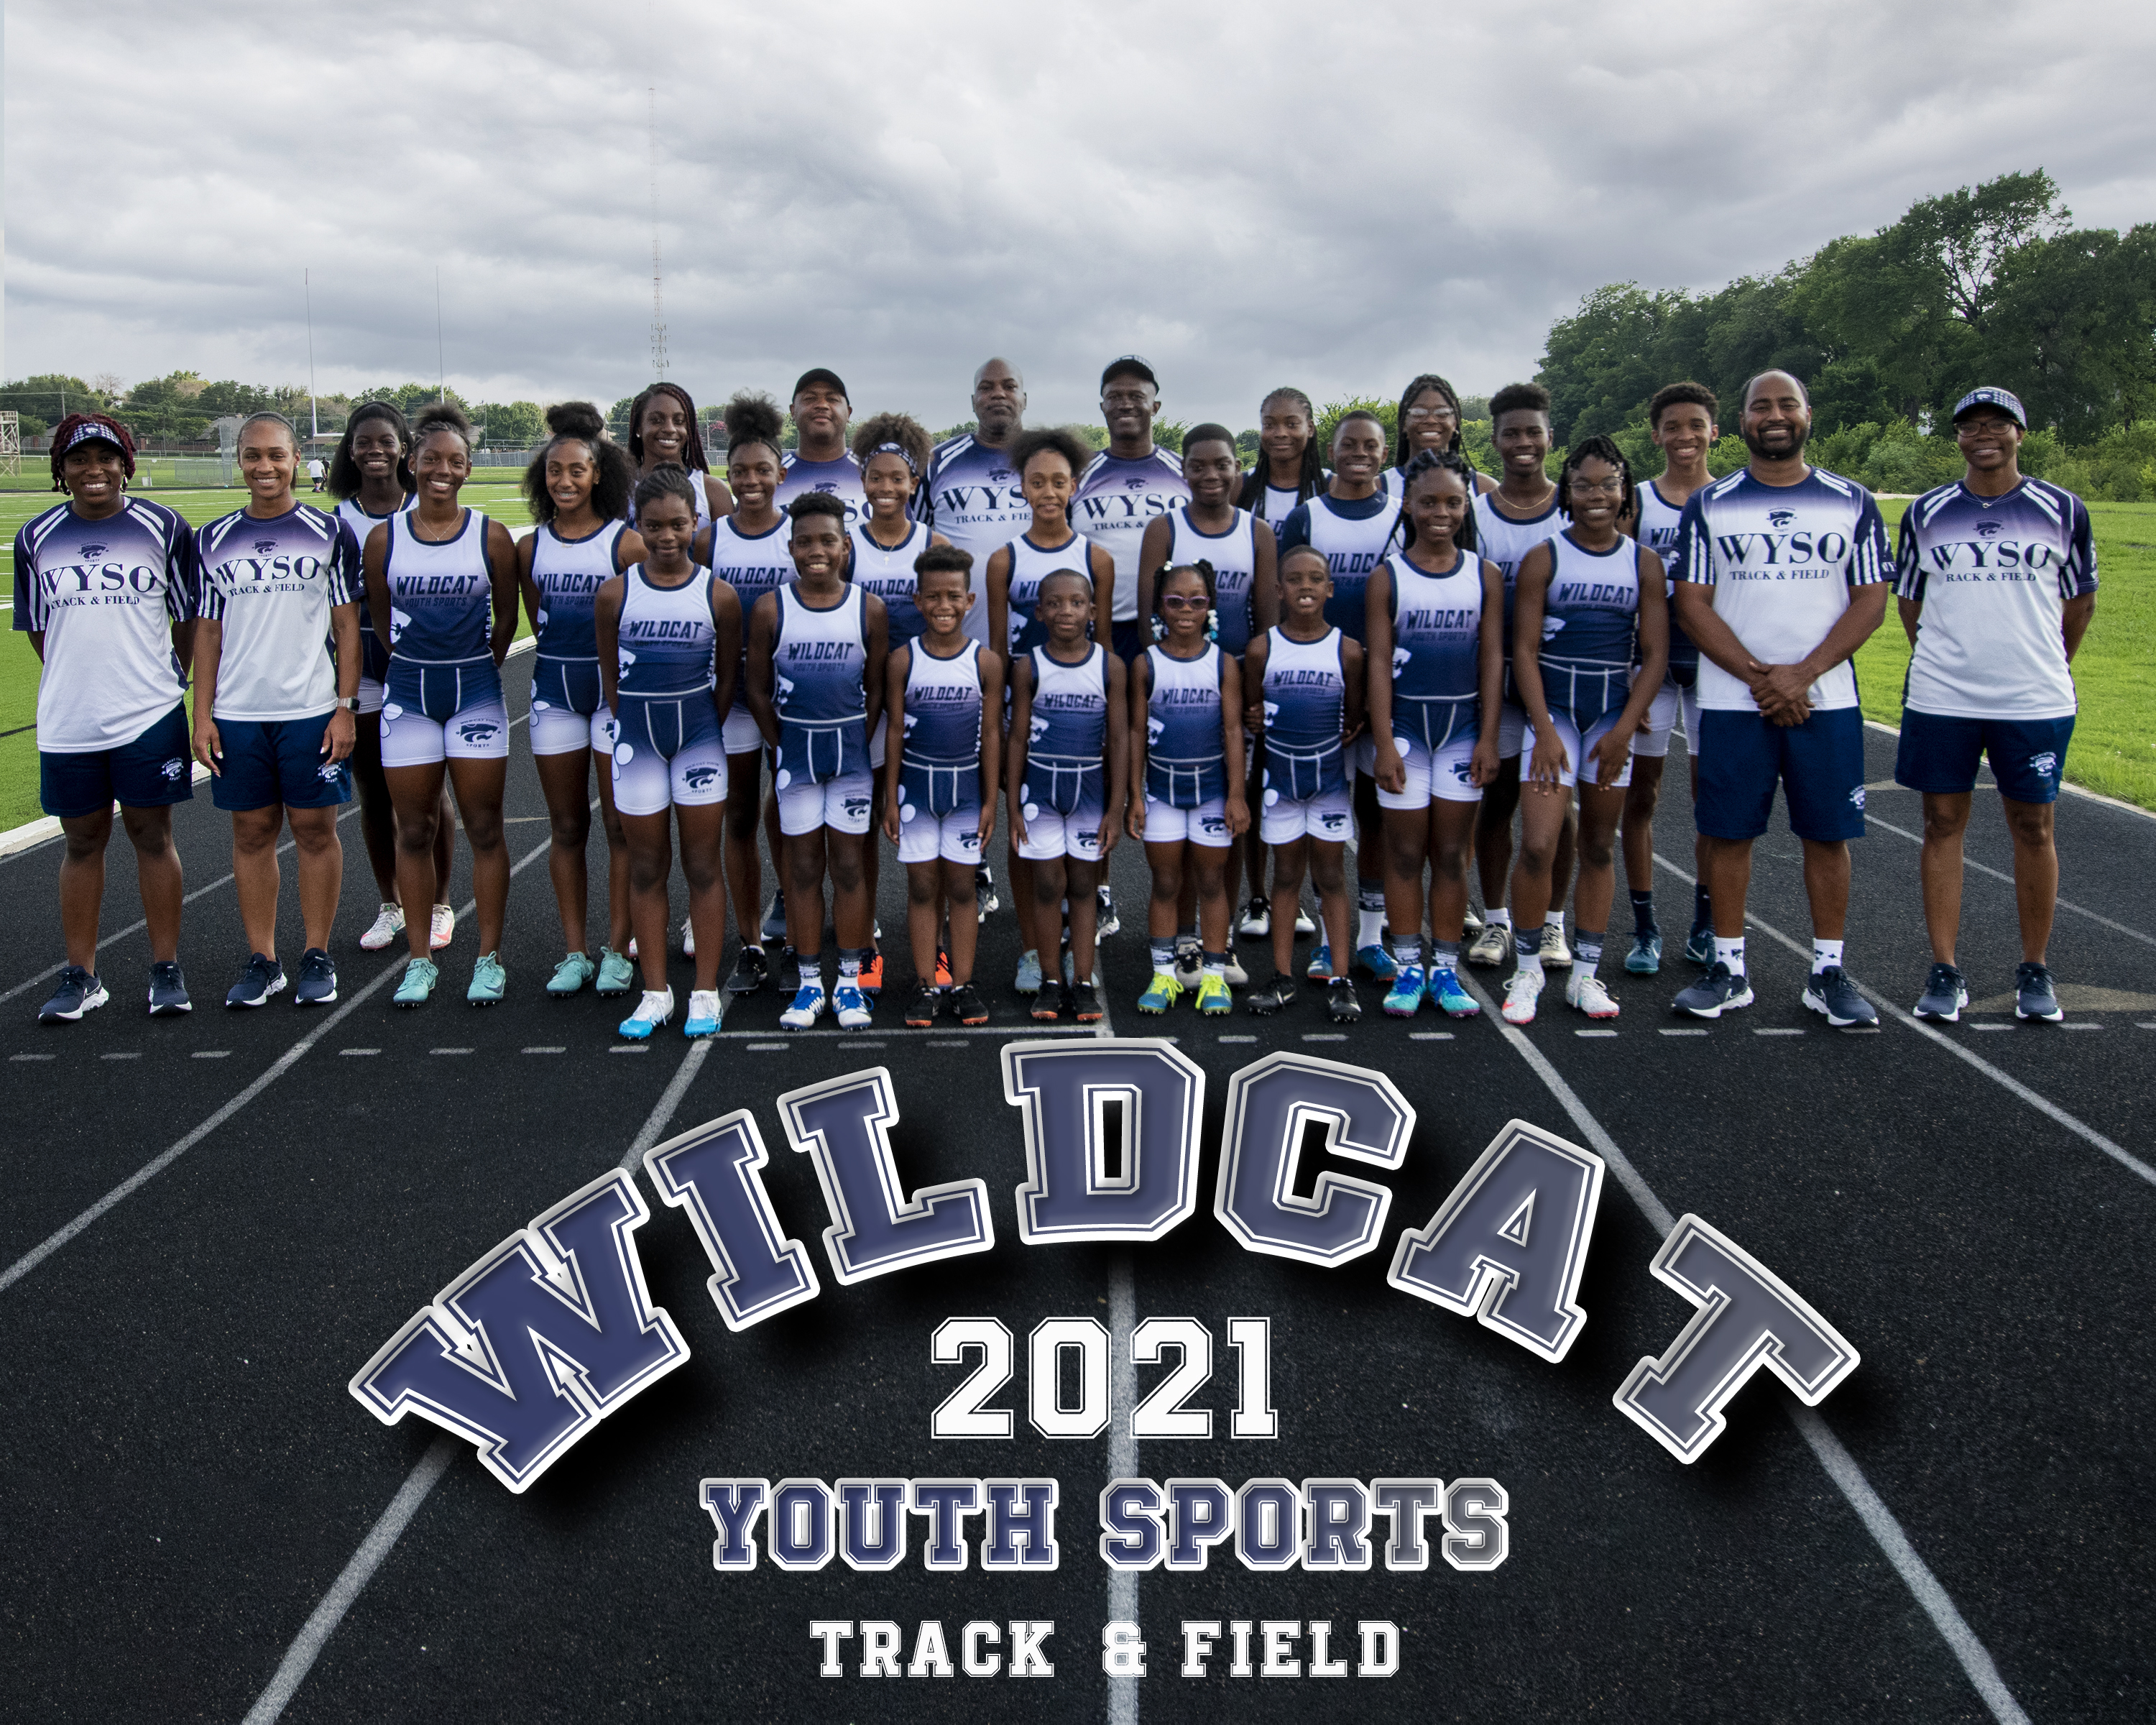 TrackTeamPic2021.jpg